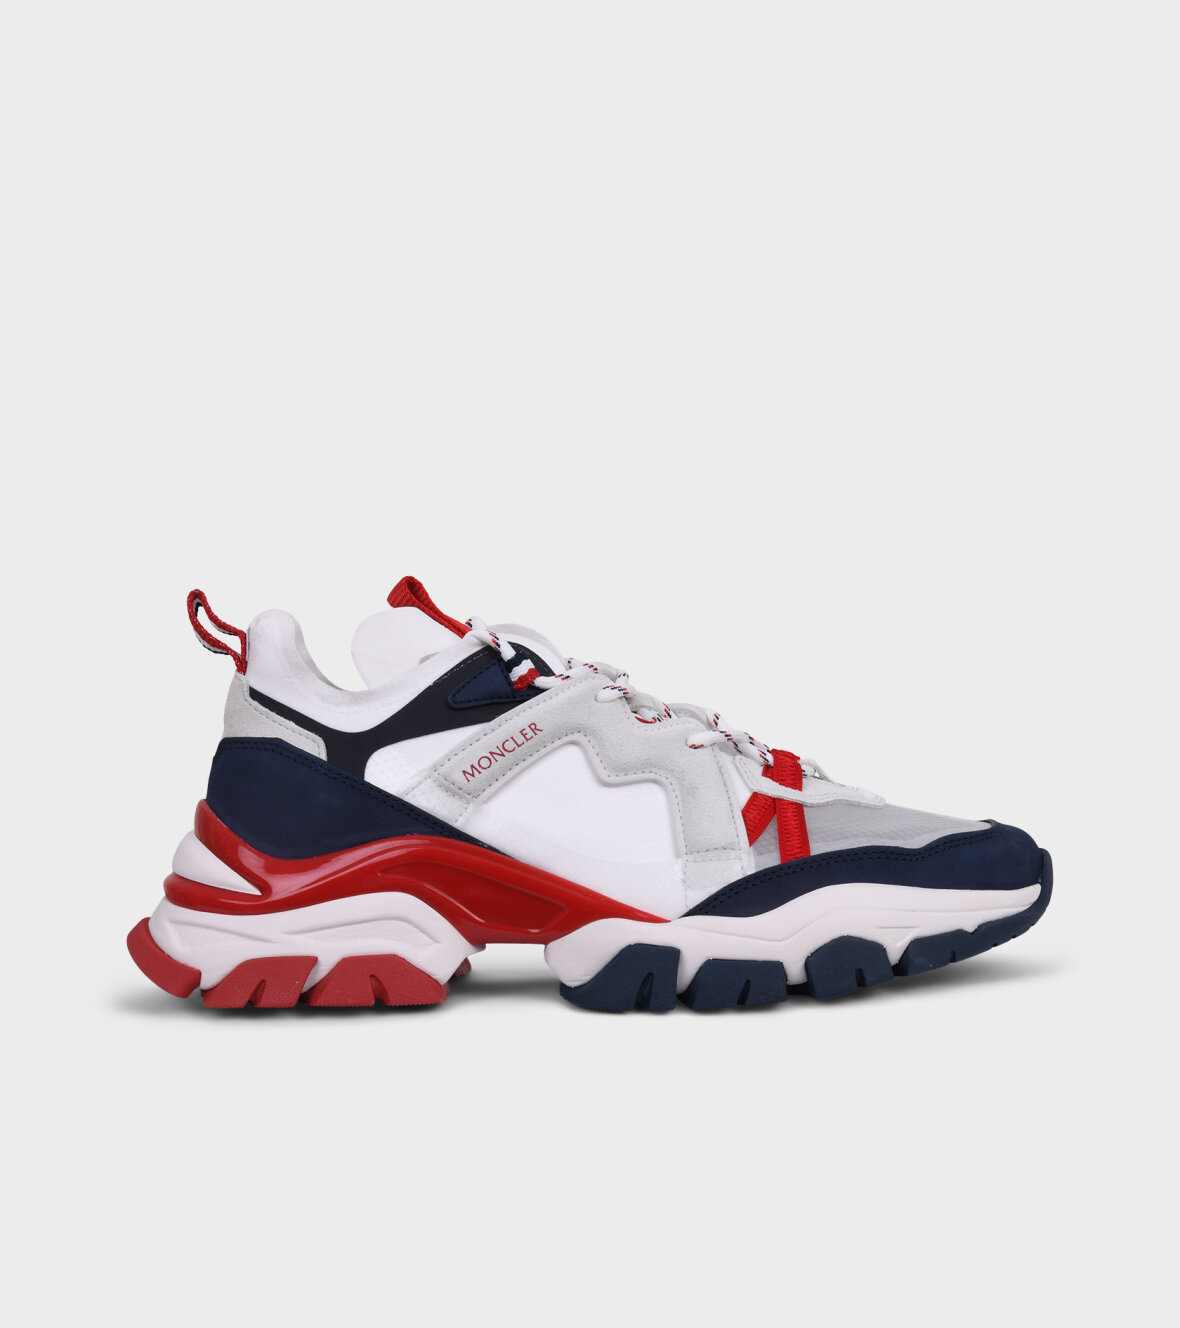 vinter Hula hop tiggeri dr. Adams - Moncler Leave No Trace Sneakers White/Red/Navy